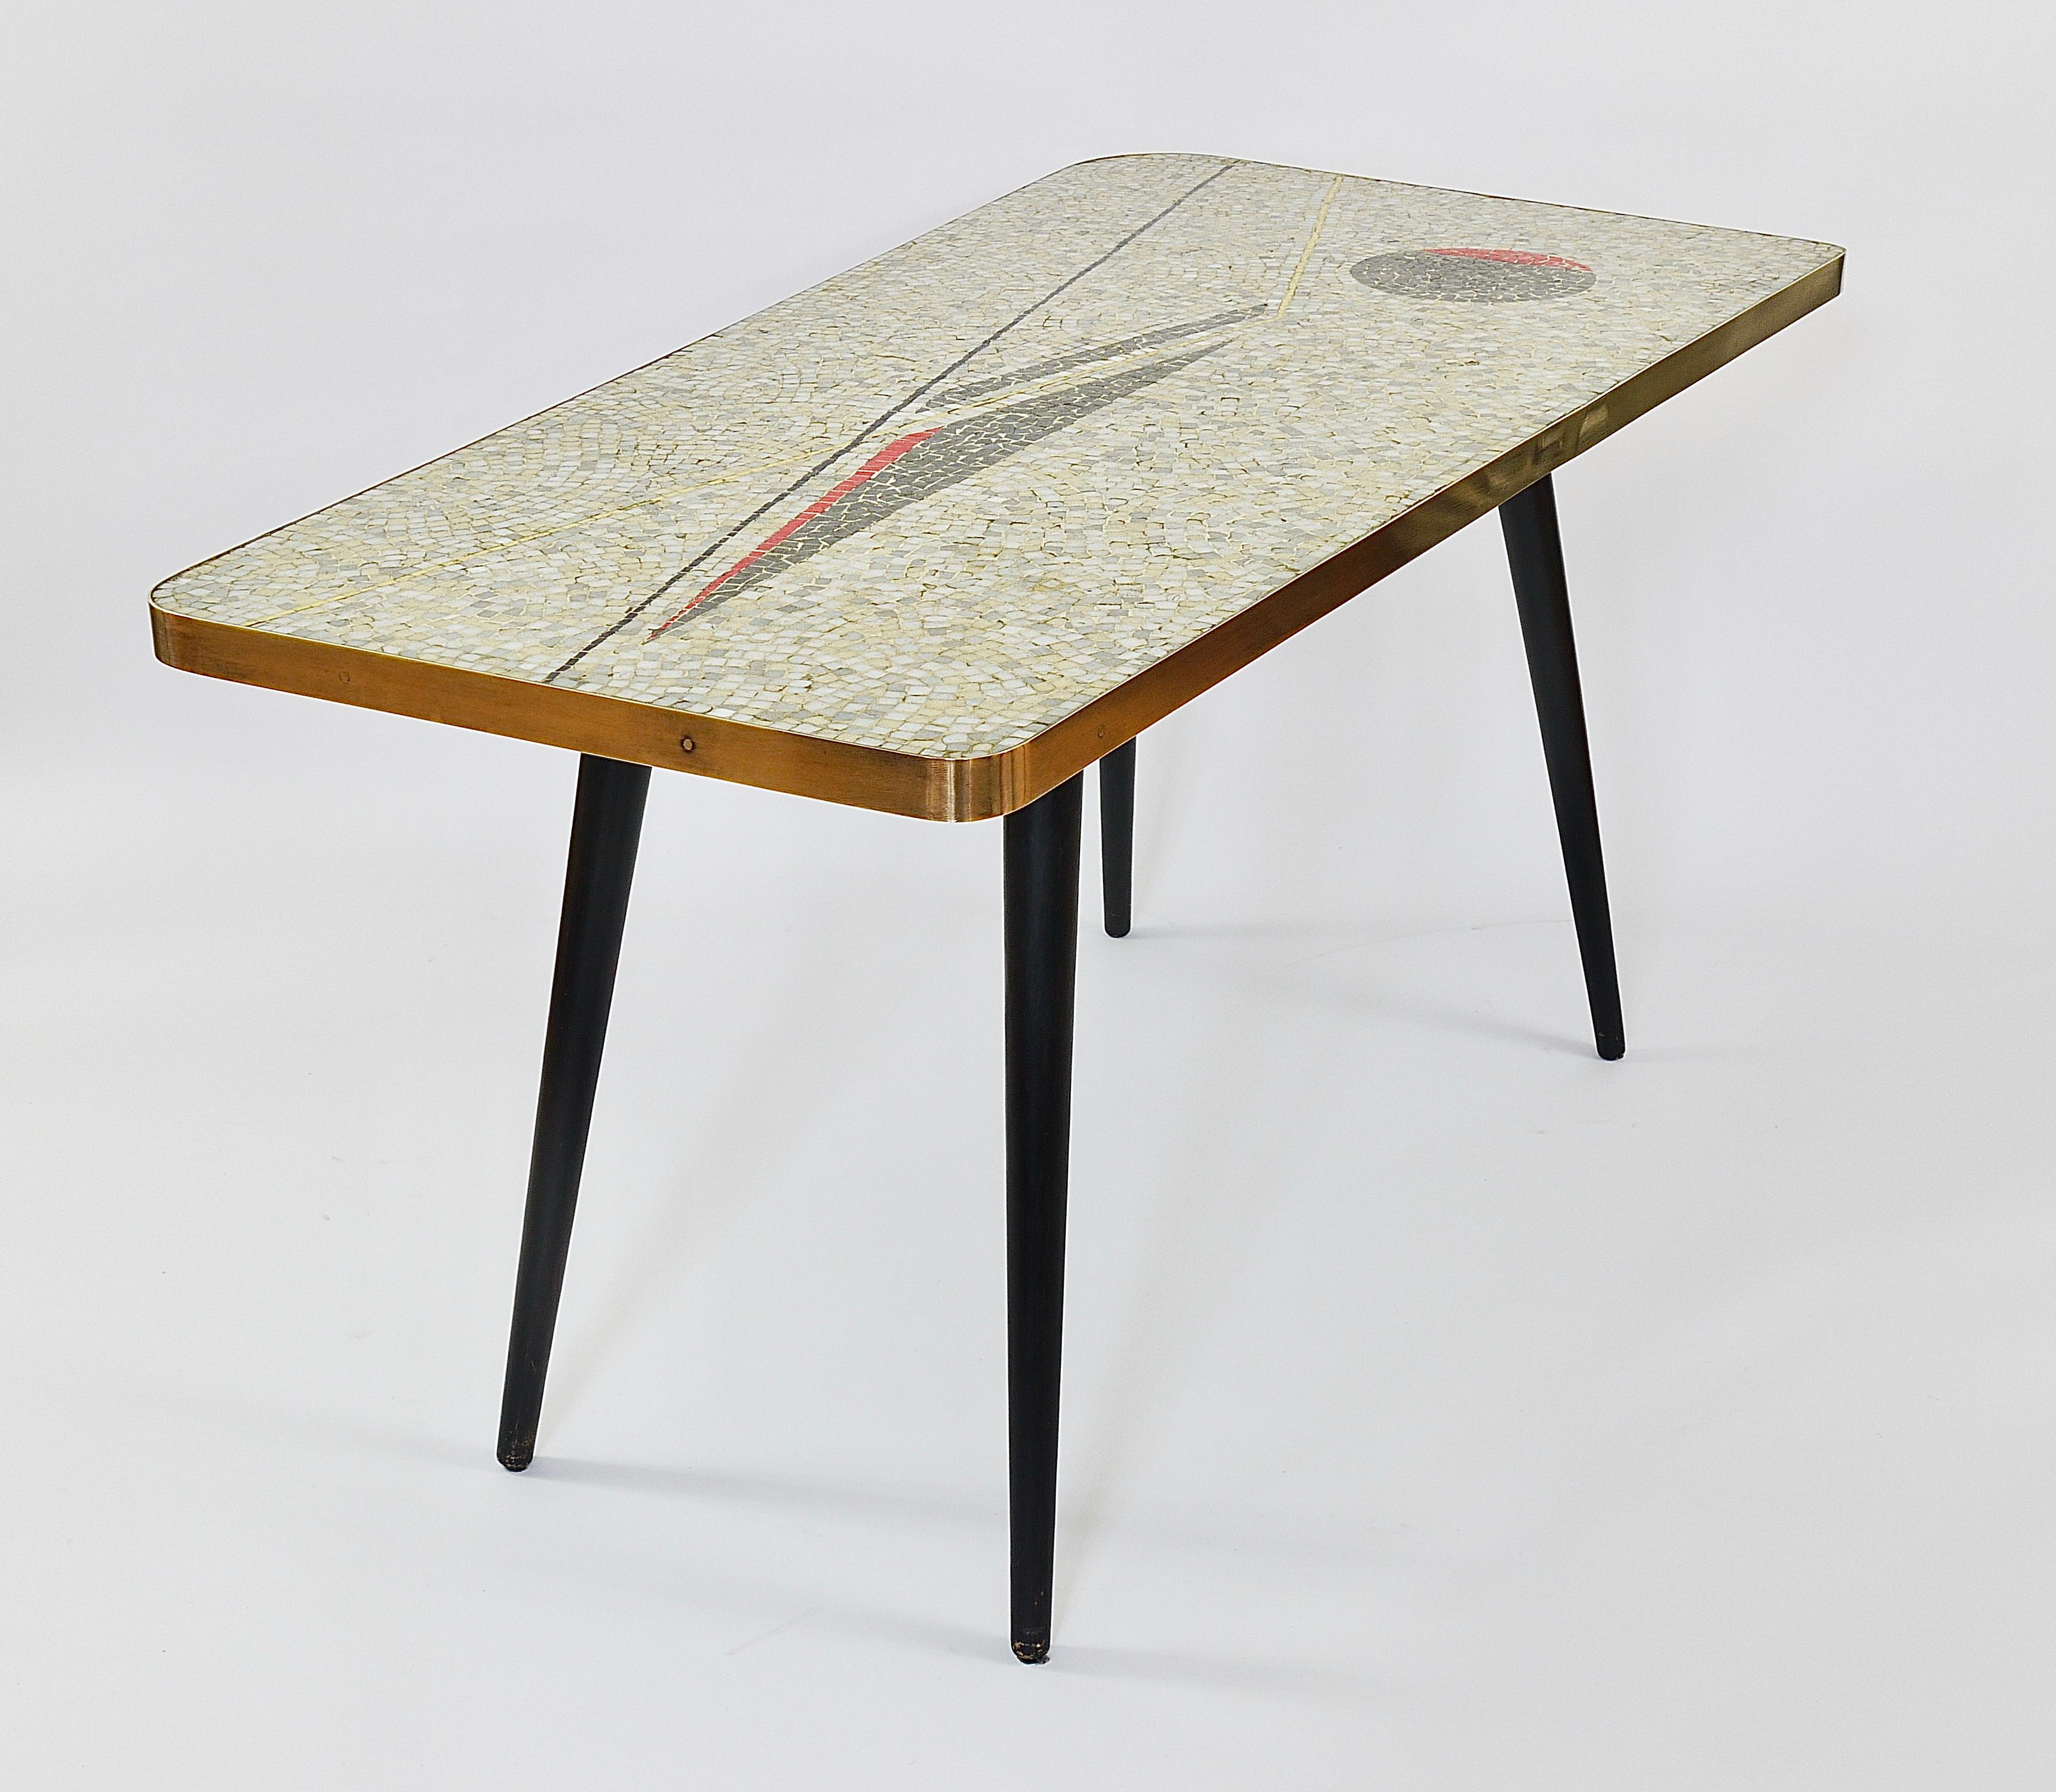 Berthold Muller Asymmetrical Mosaic Tile Coffee or Sofa Table, Germany, 1950s For Sale 7